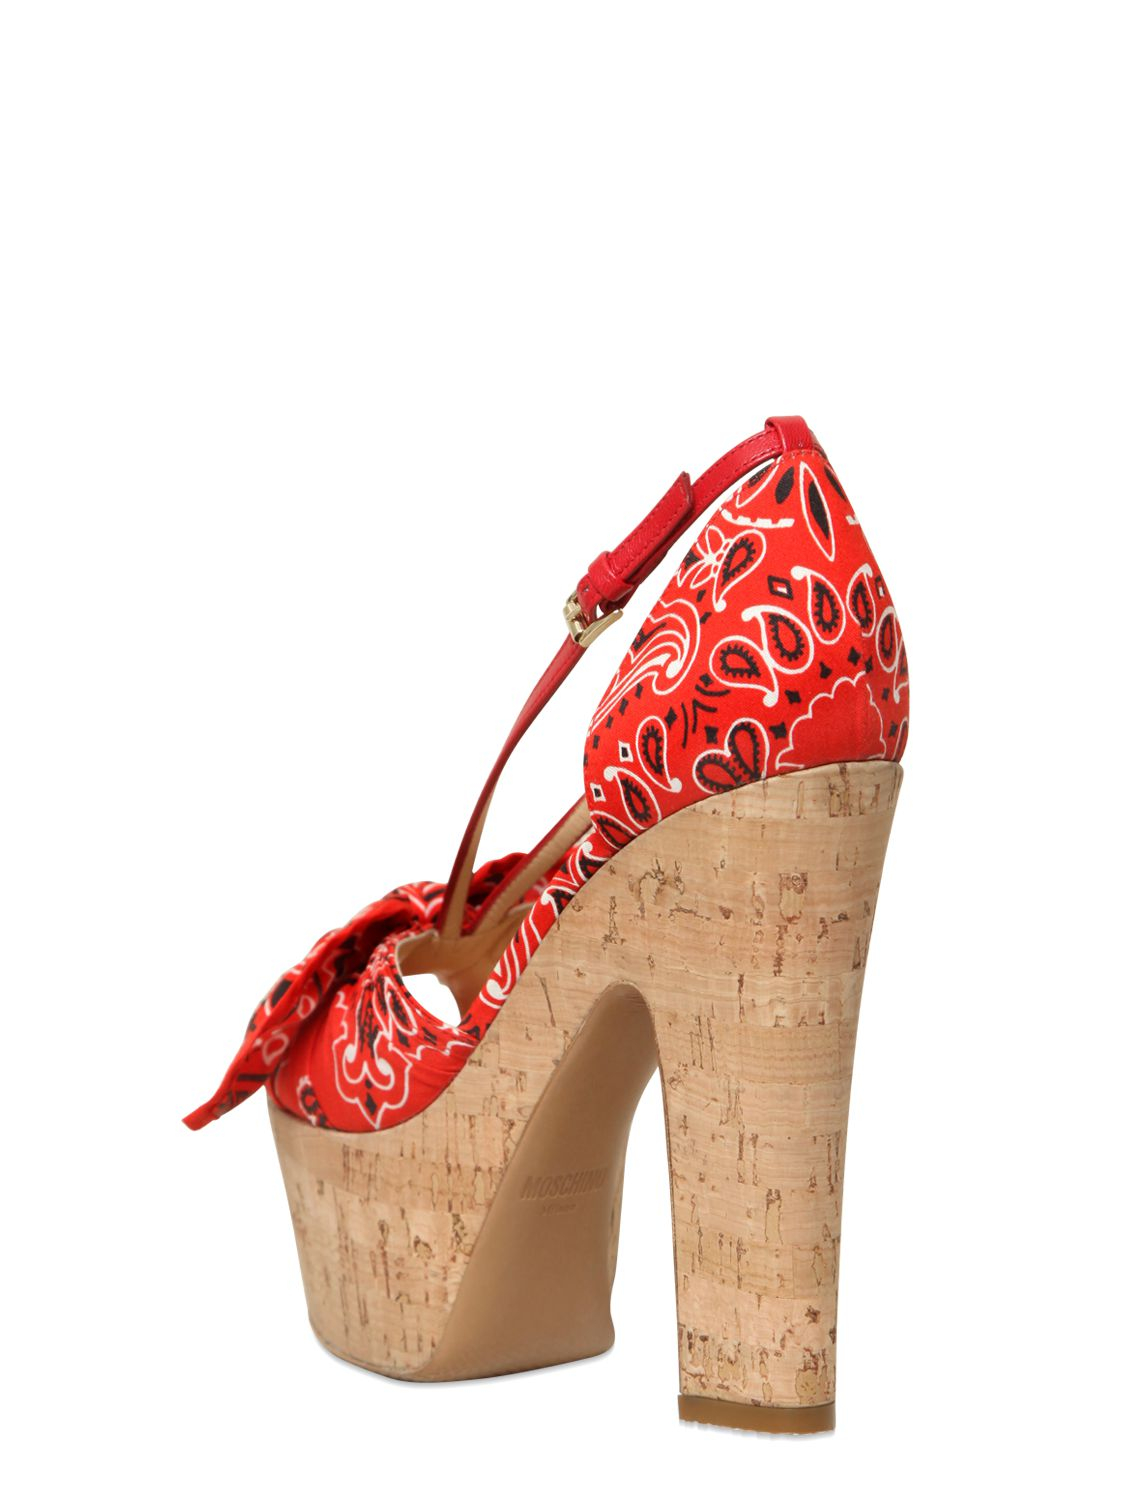 Lyst Moschino 135mm Bandana Printed Cotton Sandals in Red